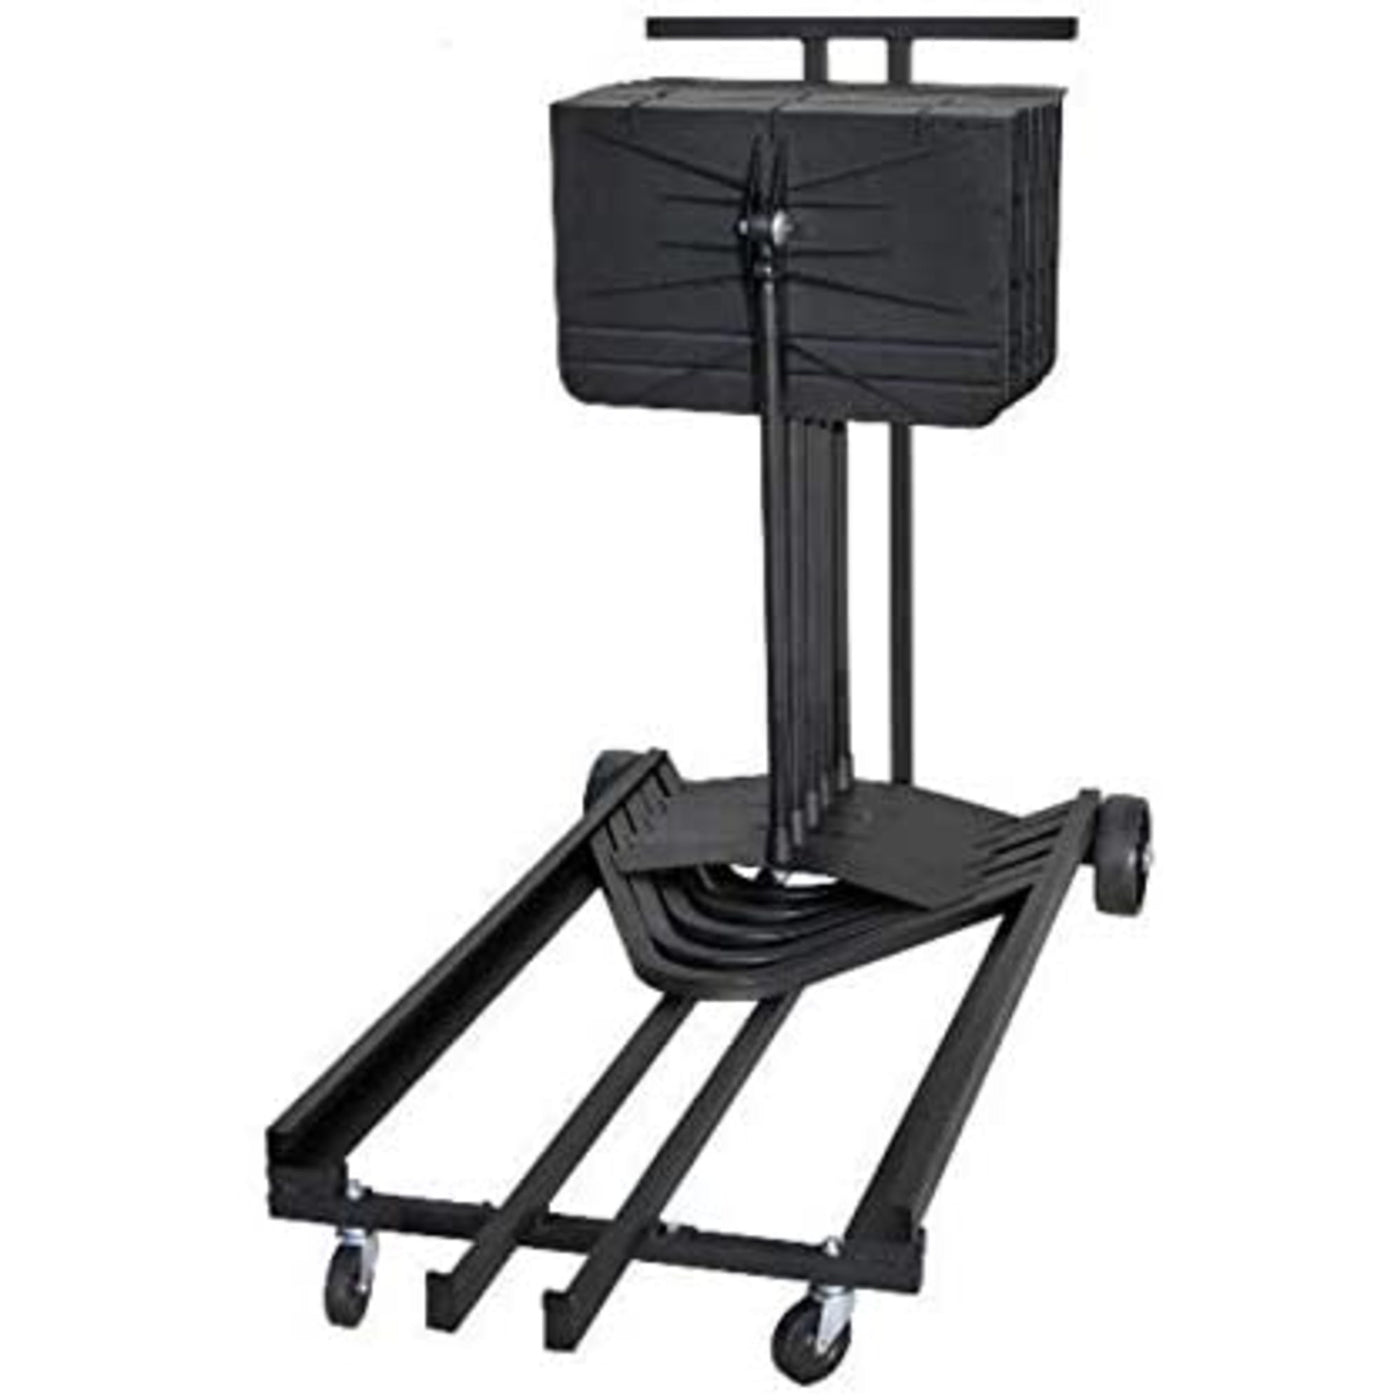 Manhasset Harmony Music Stand Cart for Music Stands (1980)